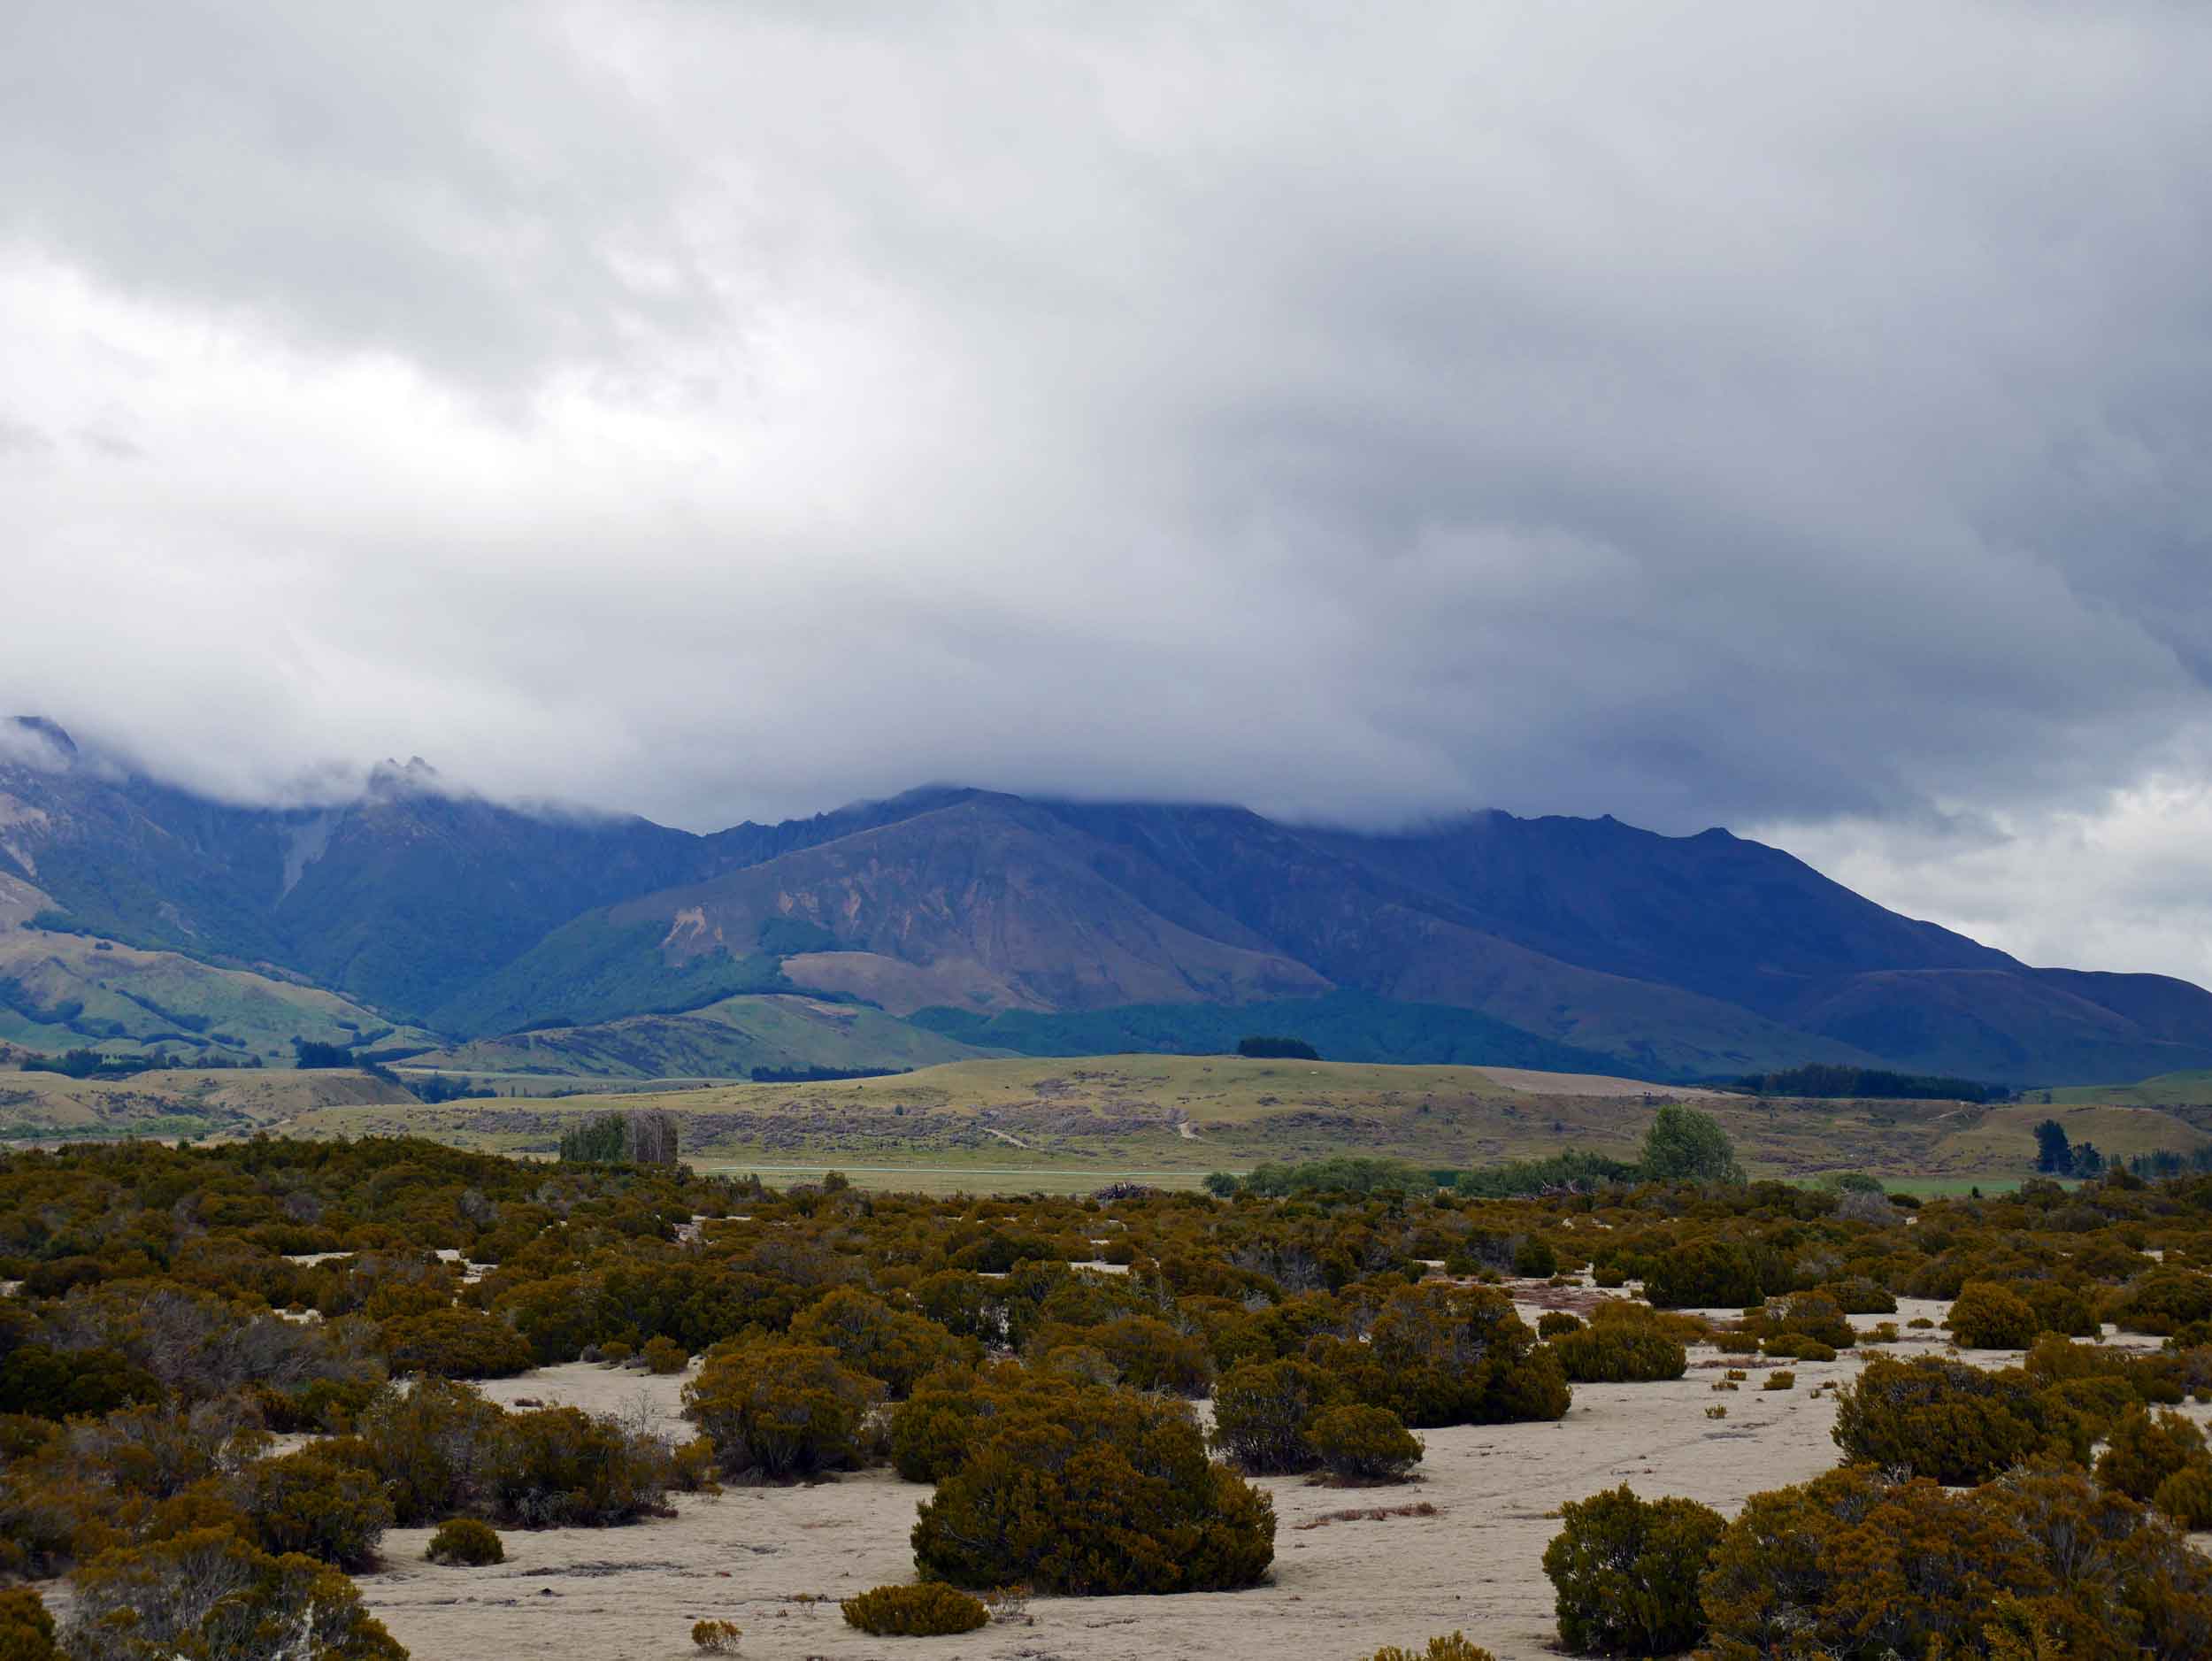  The scrubland of the Wilderness Scientific Reserve, just east of Te Anau on the way to Milford Sound, features landscape reminiscent of the last Ice Age (Jan 8).&nbsp; 